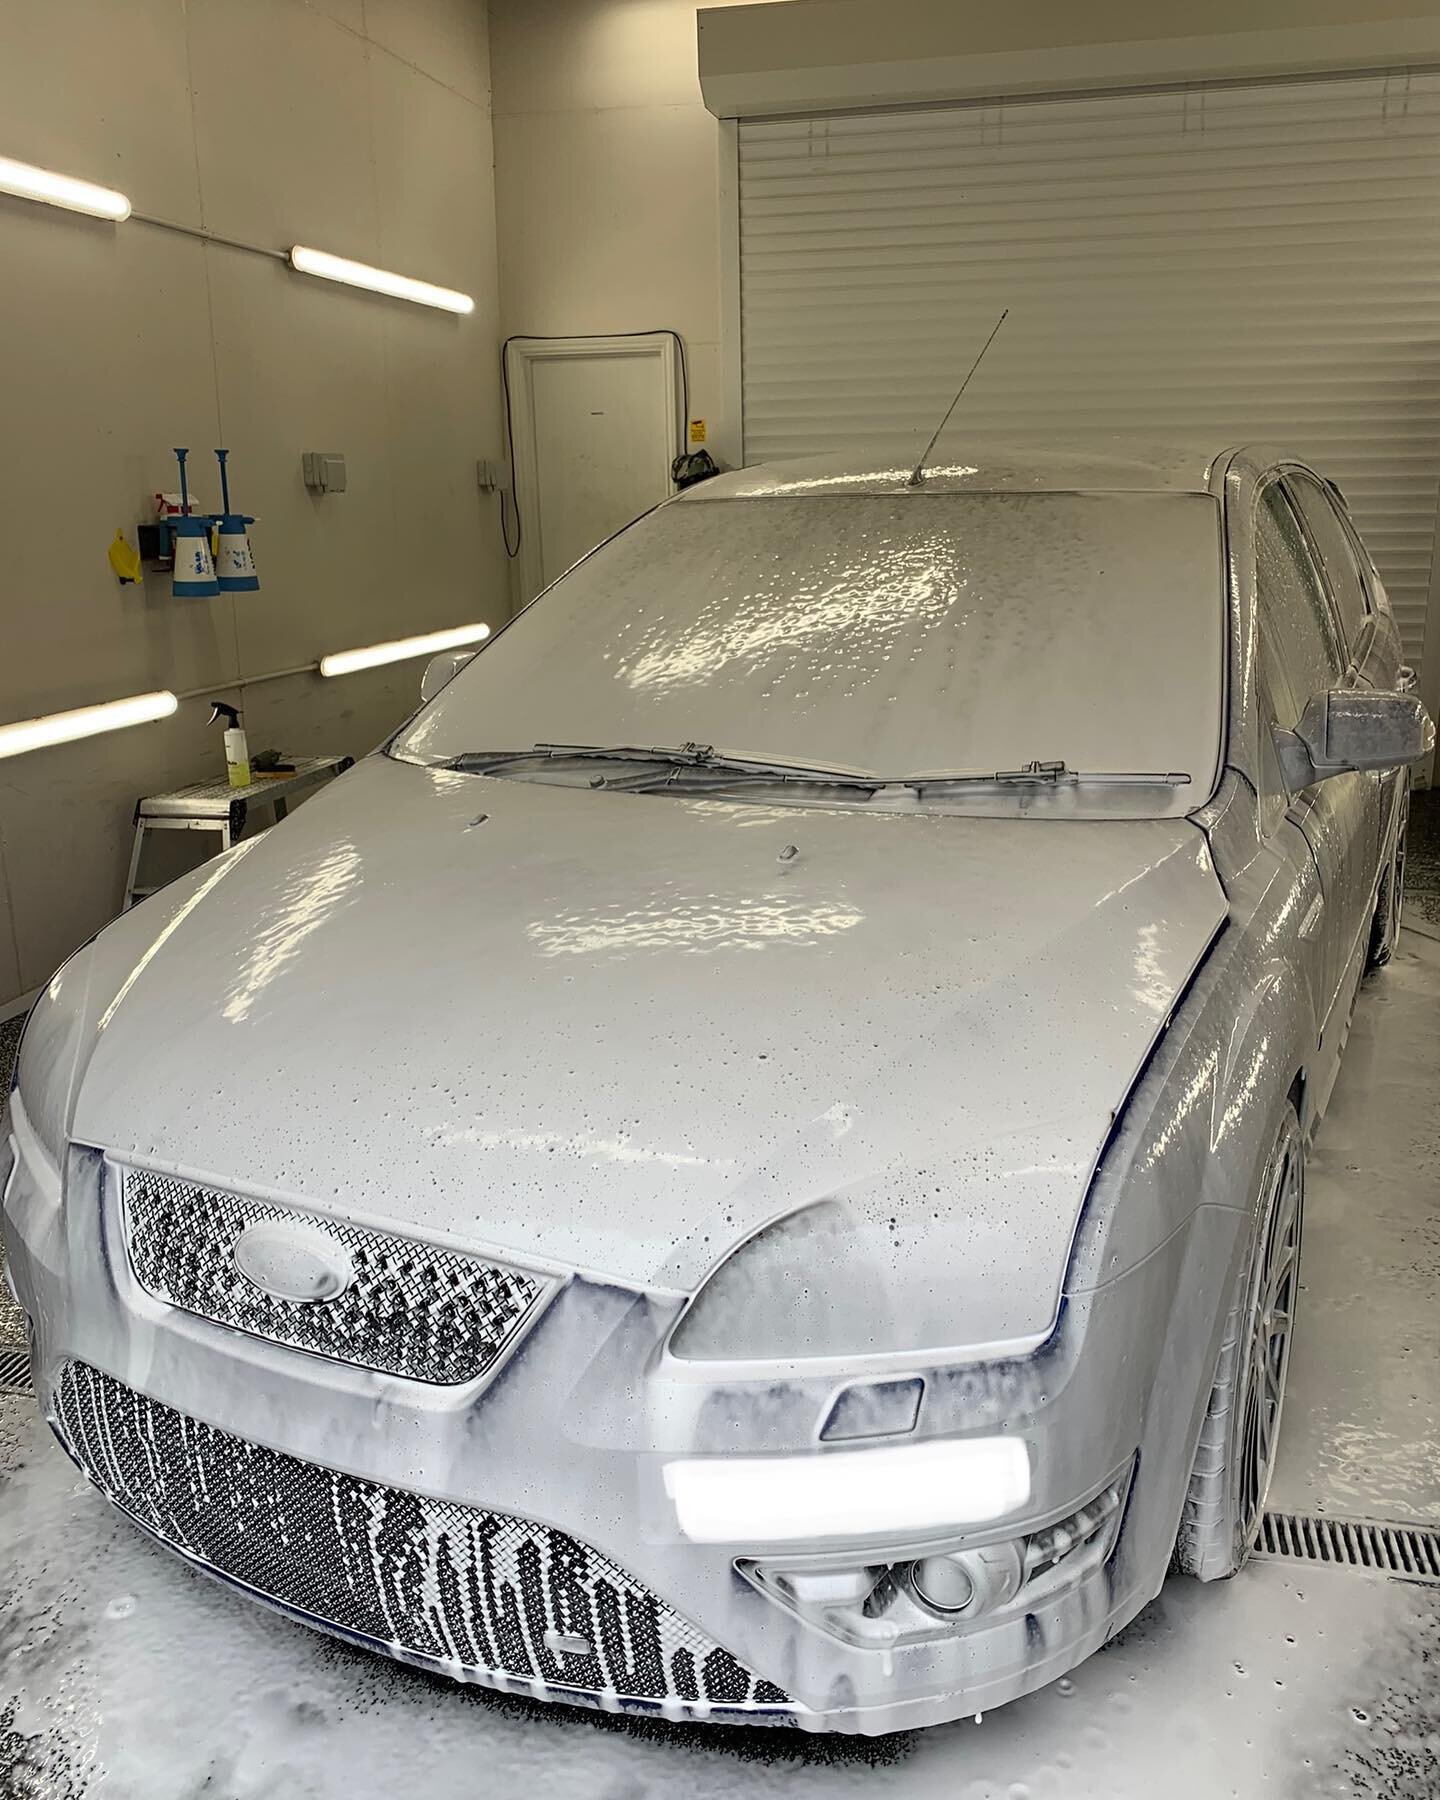 We carried out a 1 stage paint correction to remove as many defects as possible and gave the exterior a good once over. We applied Gyeon wax to protect the freshly polished paintwork, the hydrophobic properties are incredible. He was very happy with 